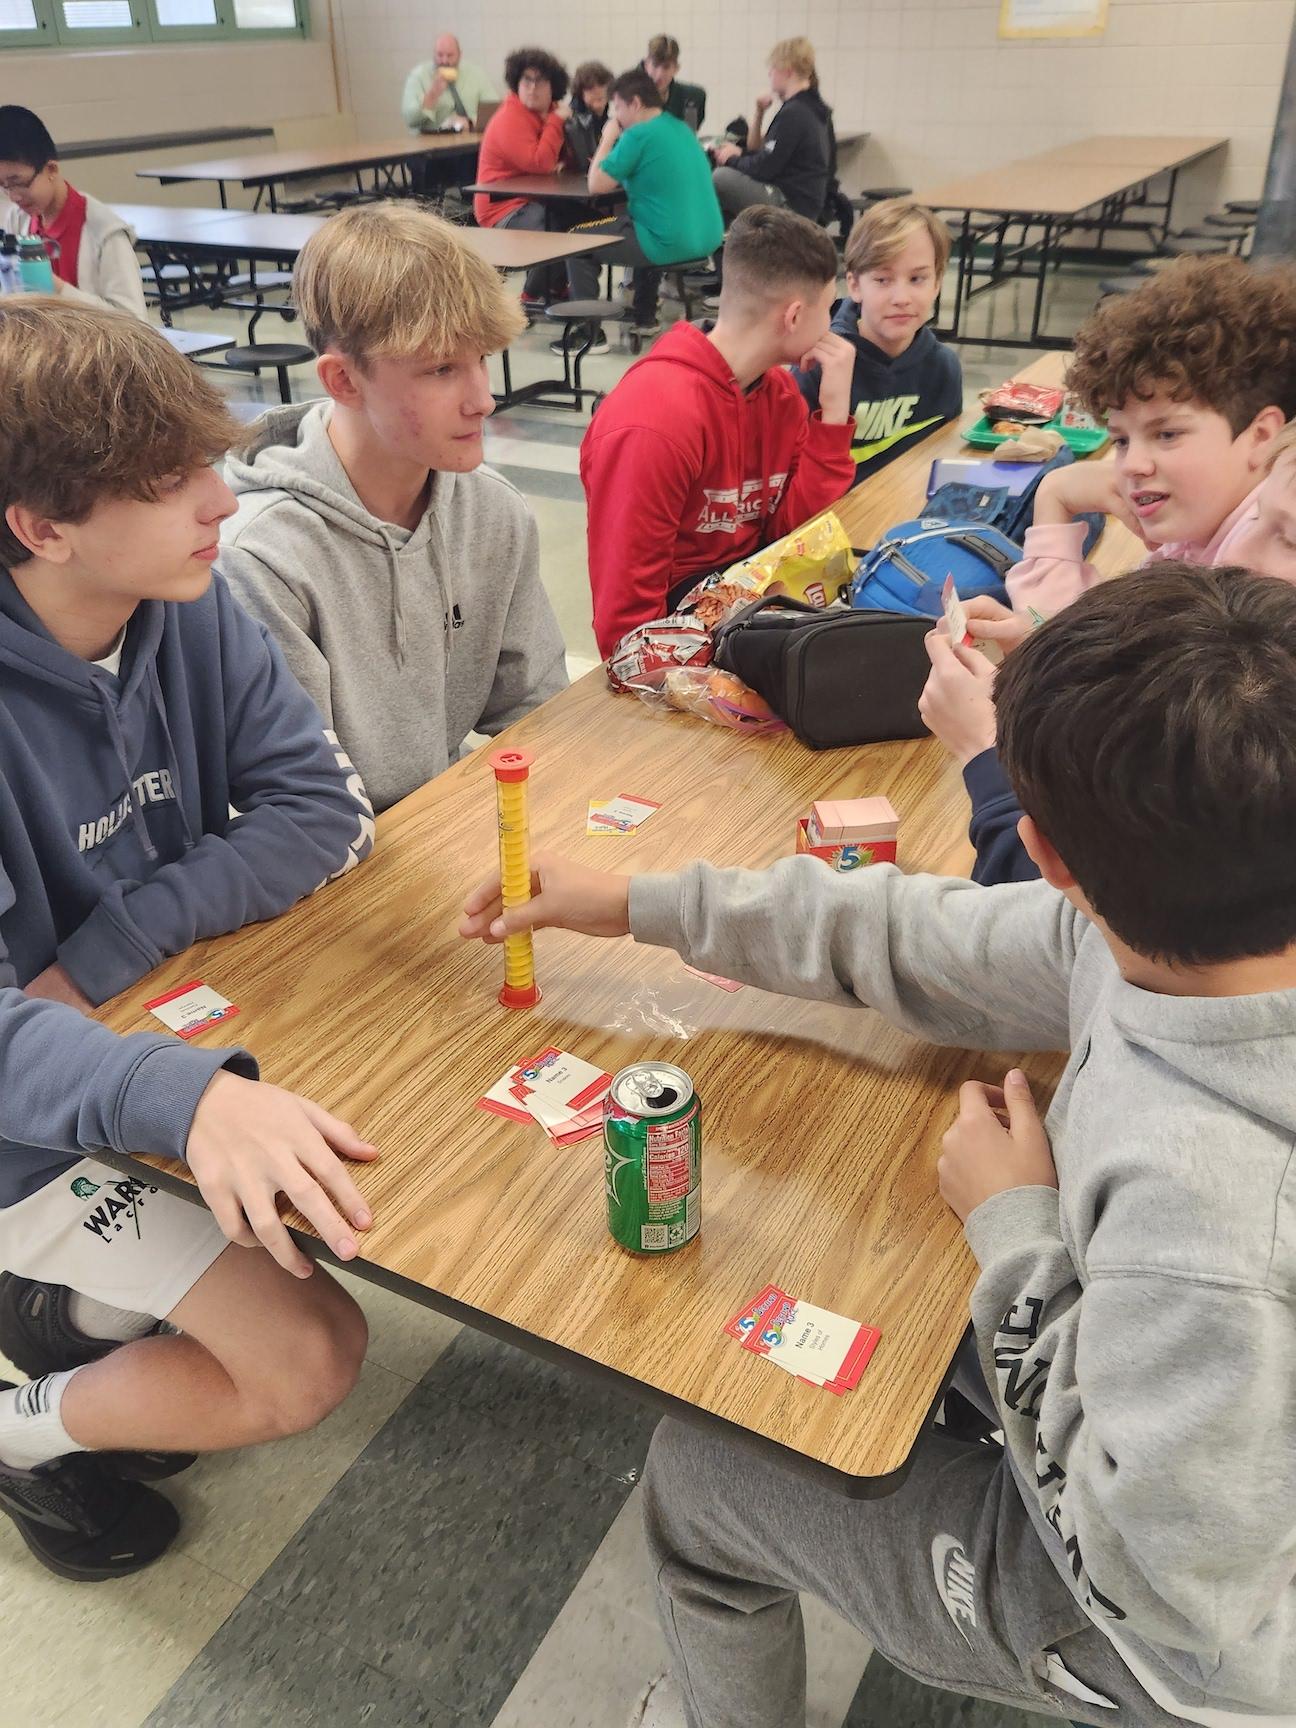 8th-graders enjoy conversation and games